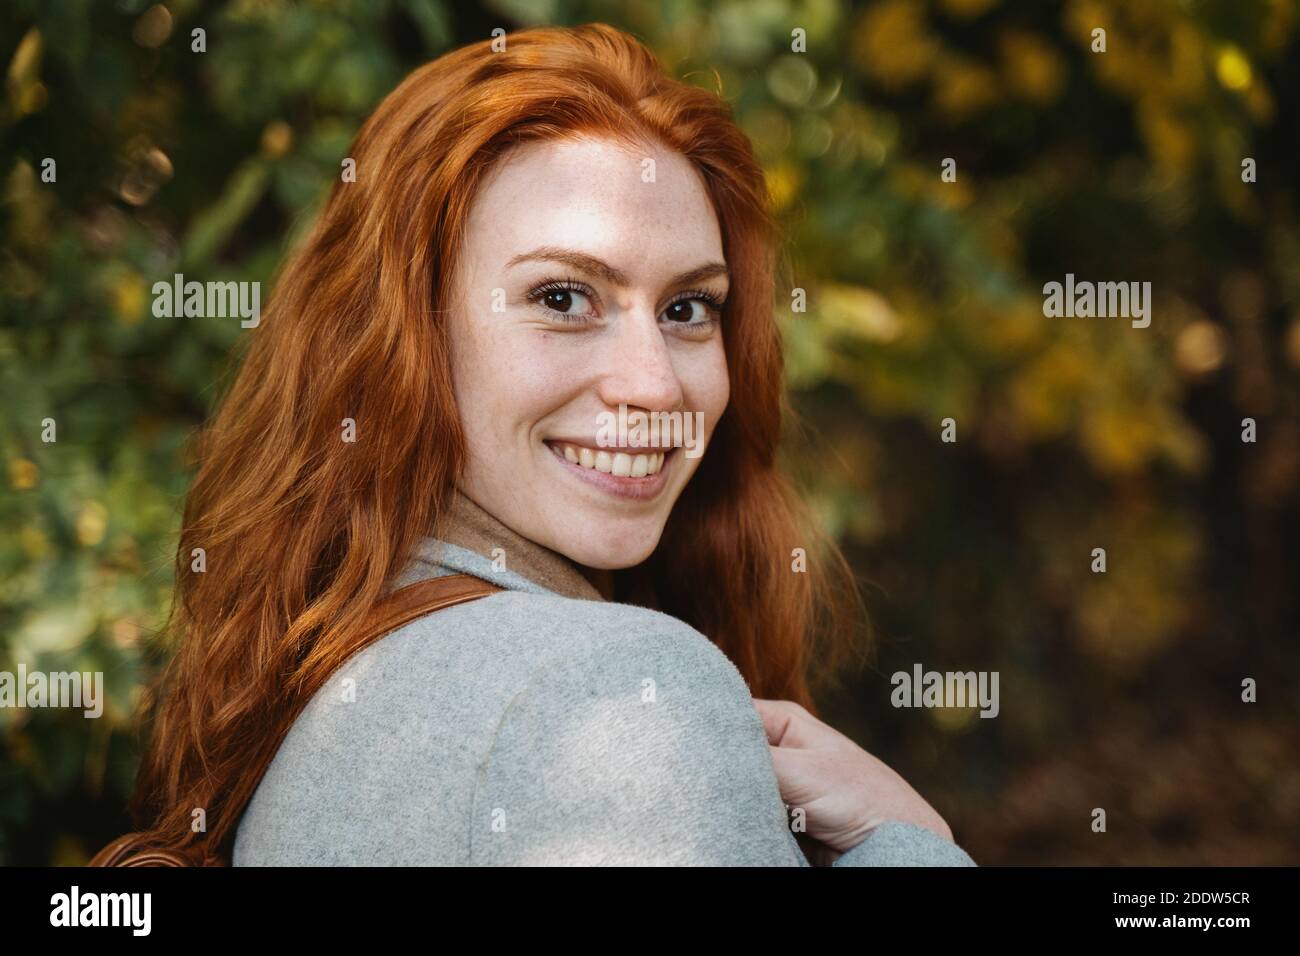 Portrait of young red haired woman during autumnal season Stock Photo